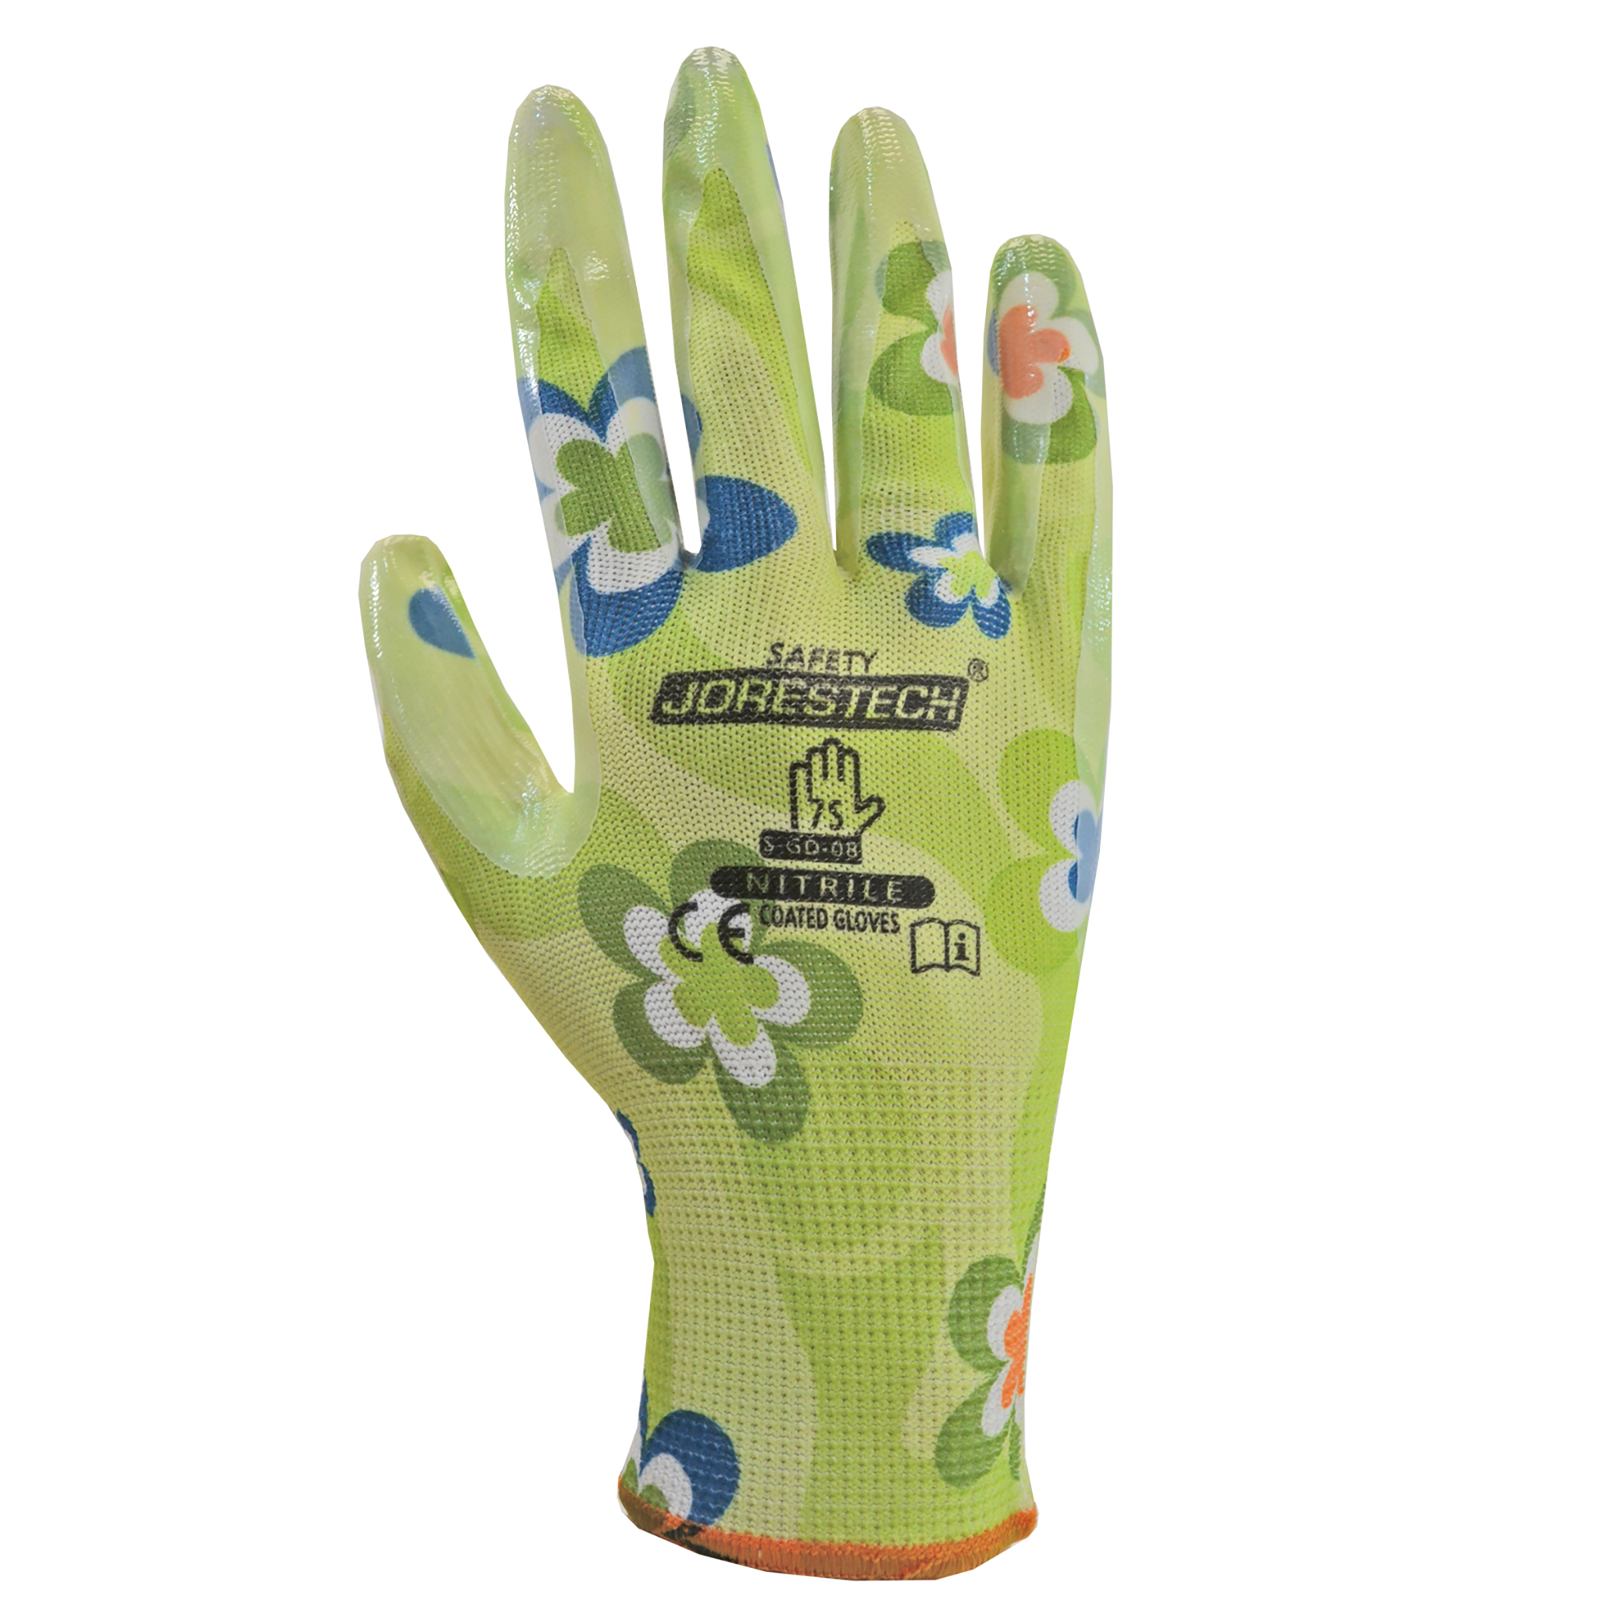 Glove for gardening printed with green and blue flowers for gardening safety gardening